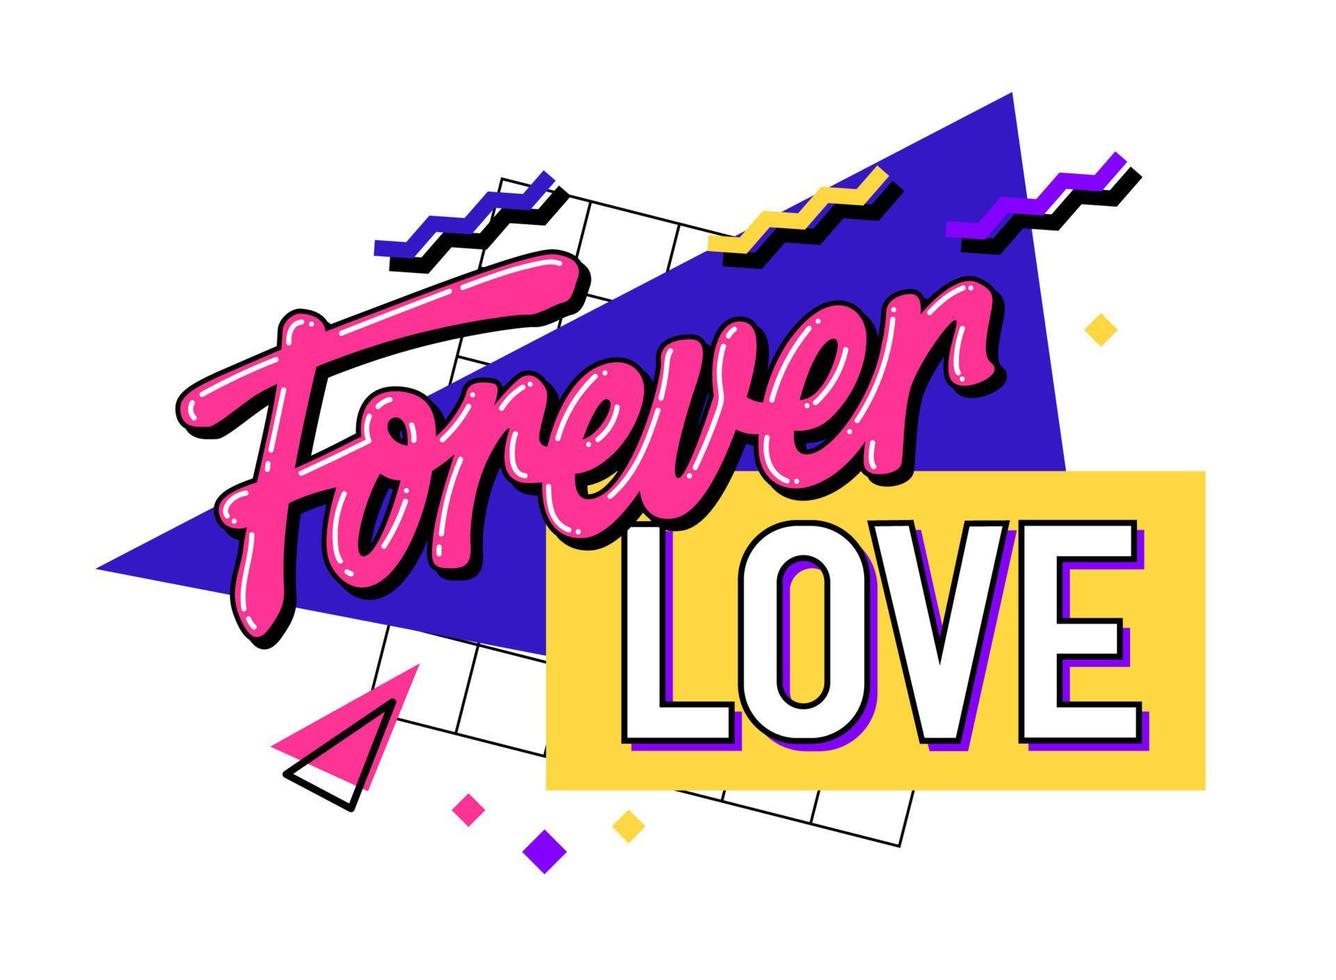 Romantic hand drawn lettering phrase in trendy 90s style - Forever love. Isolated vector design element in bright vivid colors with geometric background.